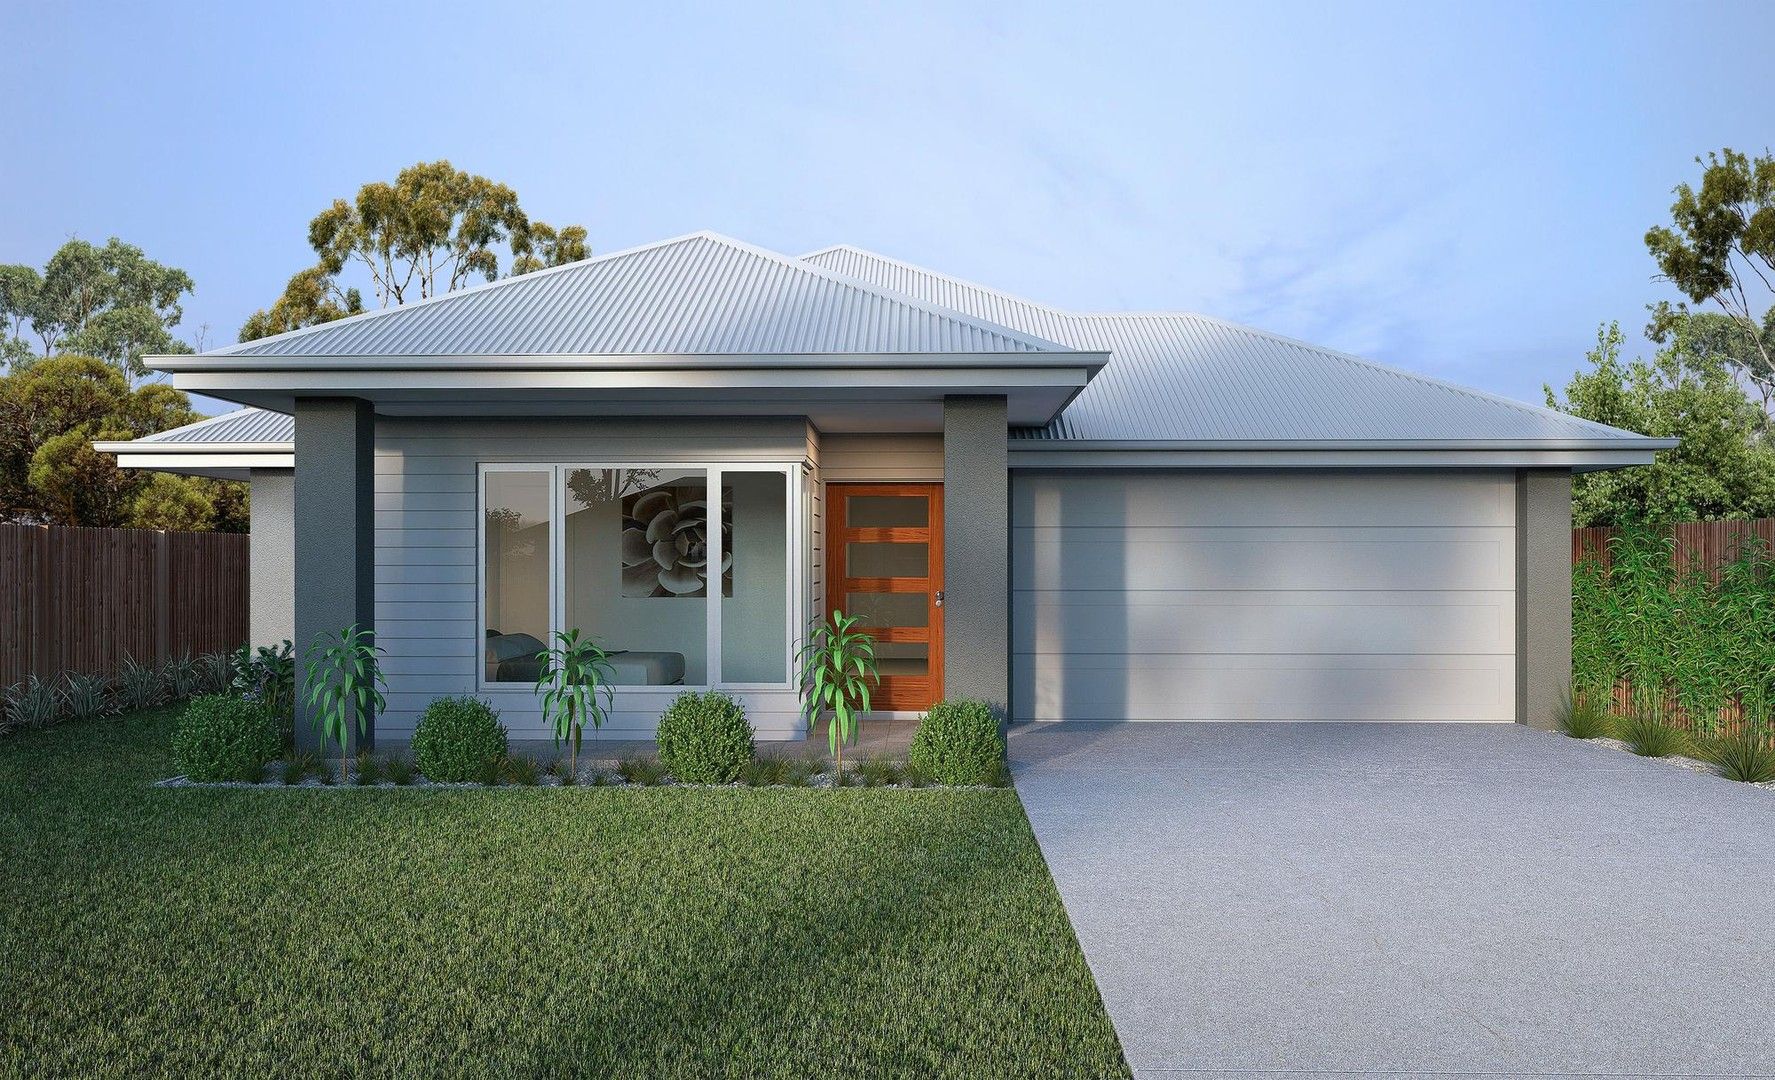 4 bedrooms New House & Land in 209 Proposed Road SINGLETON NSW, 2330